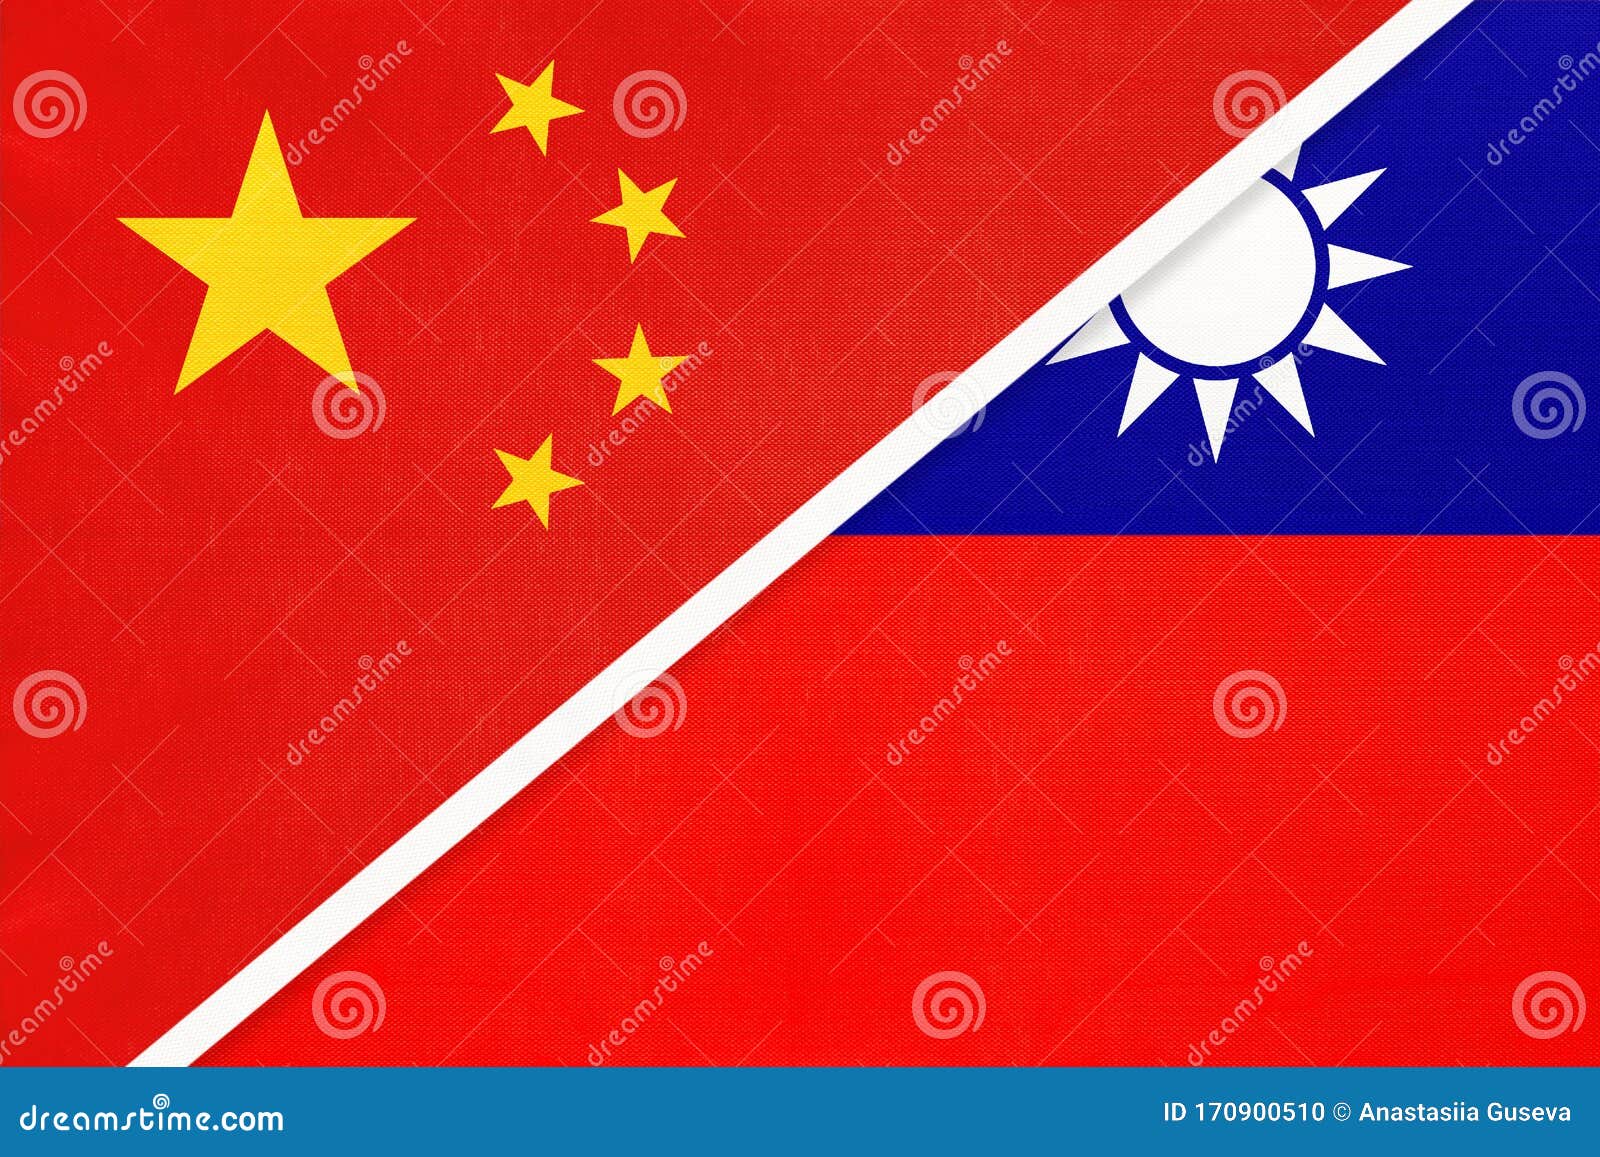 People S Republic Of China Or Prc Vs Taiwan National Flag From Textile Relationship Between Two Asian Countries Stock Photo Image Of Competition National 170900510